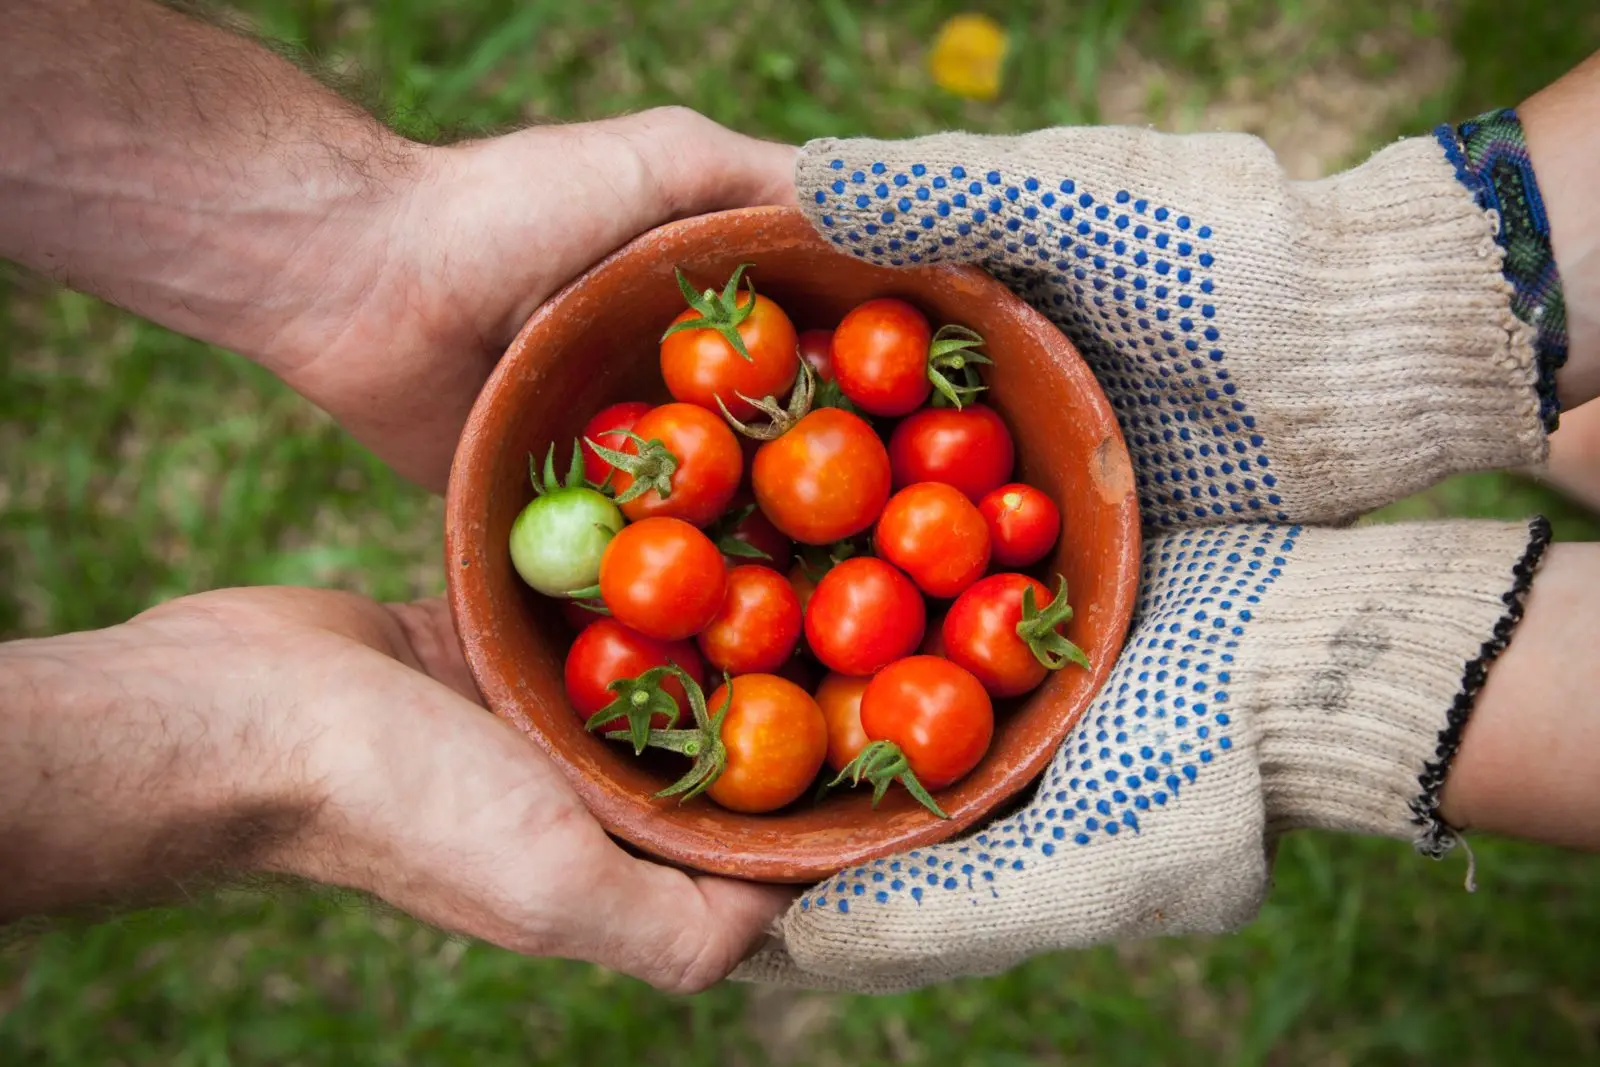 Two pairs of hands holding a bowl full of cherry tomatoes. One of them is wearing gardening gloves